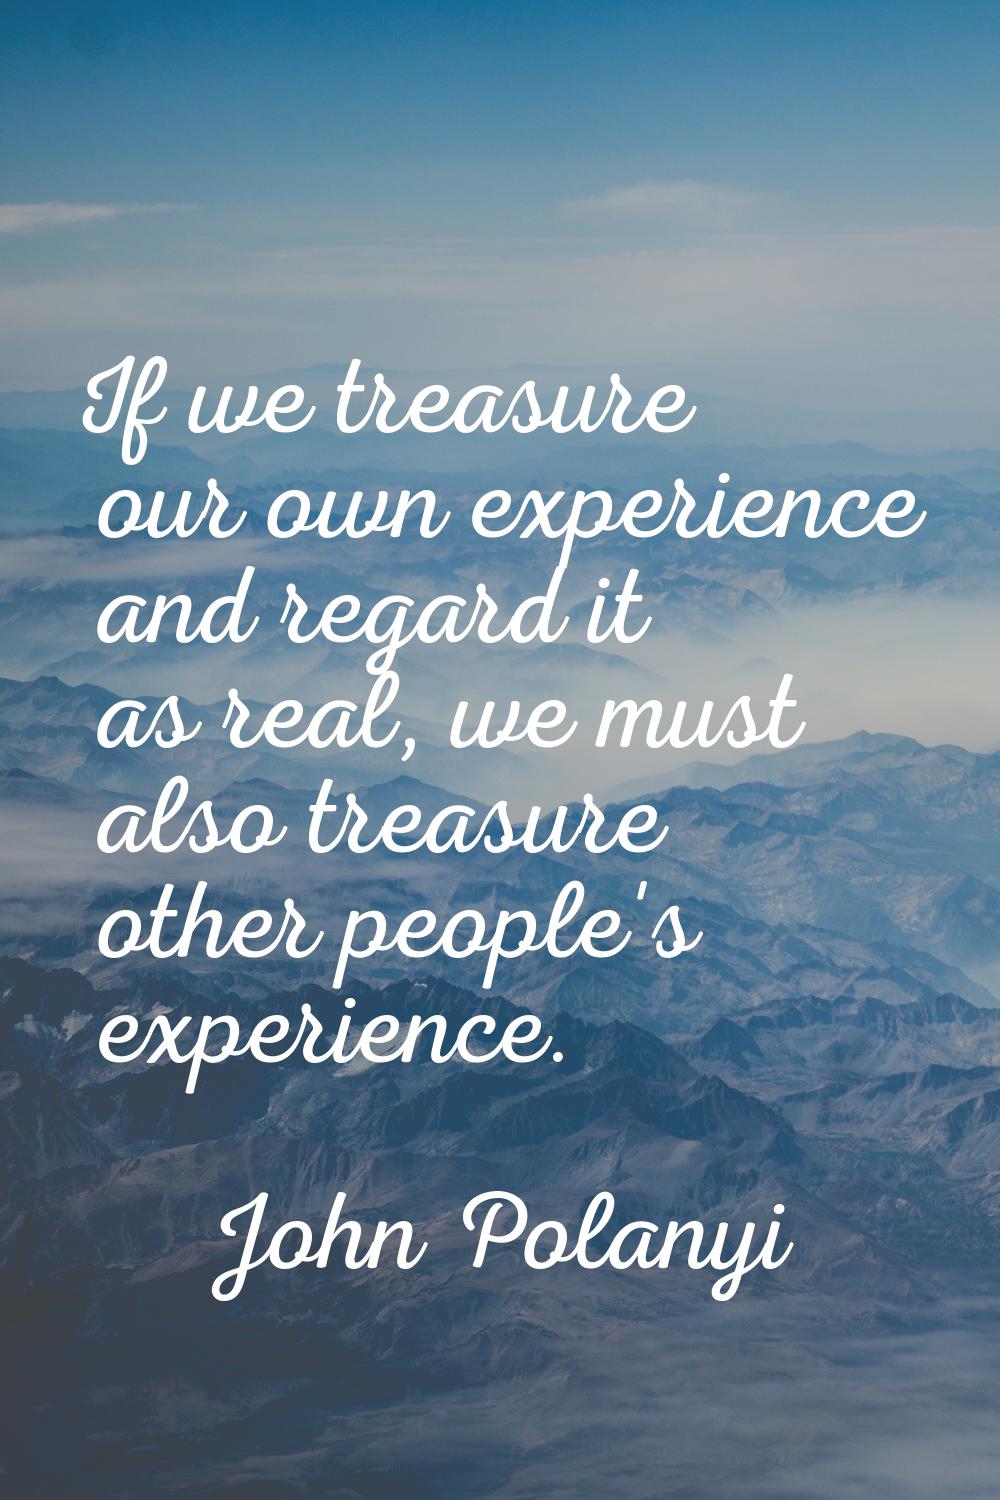 If we treasure our own experience and regard it as real, we must also treasure other people's exper